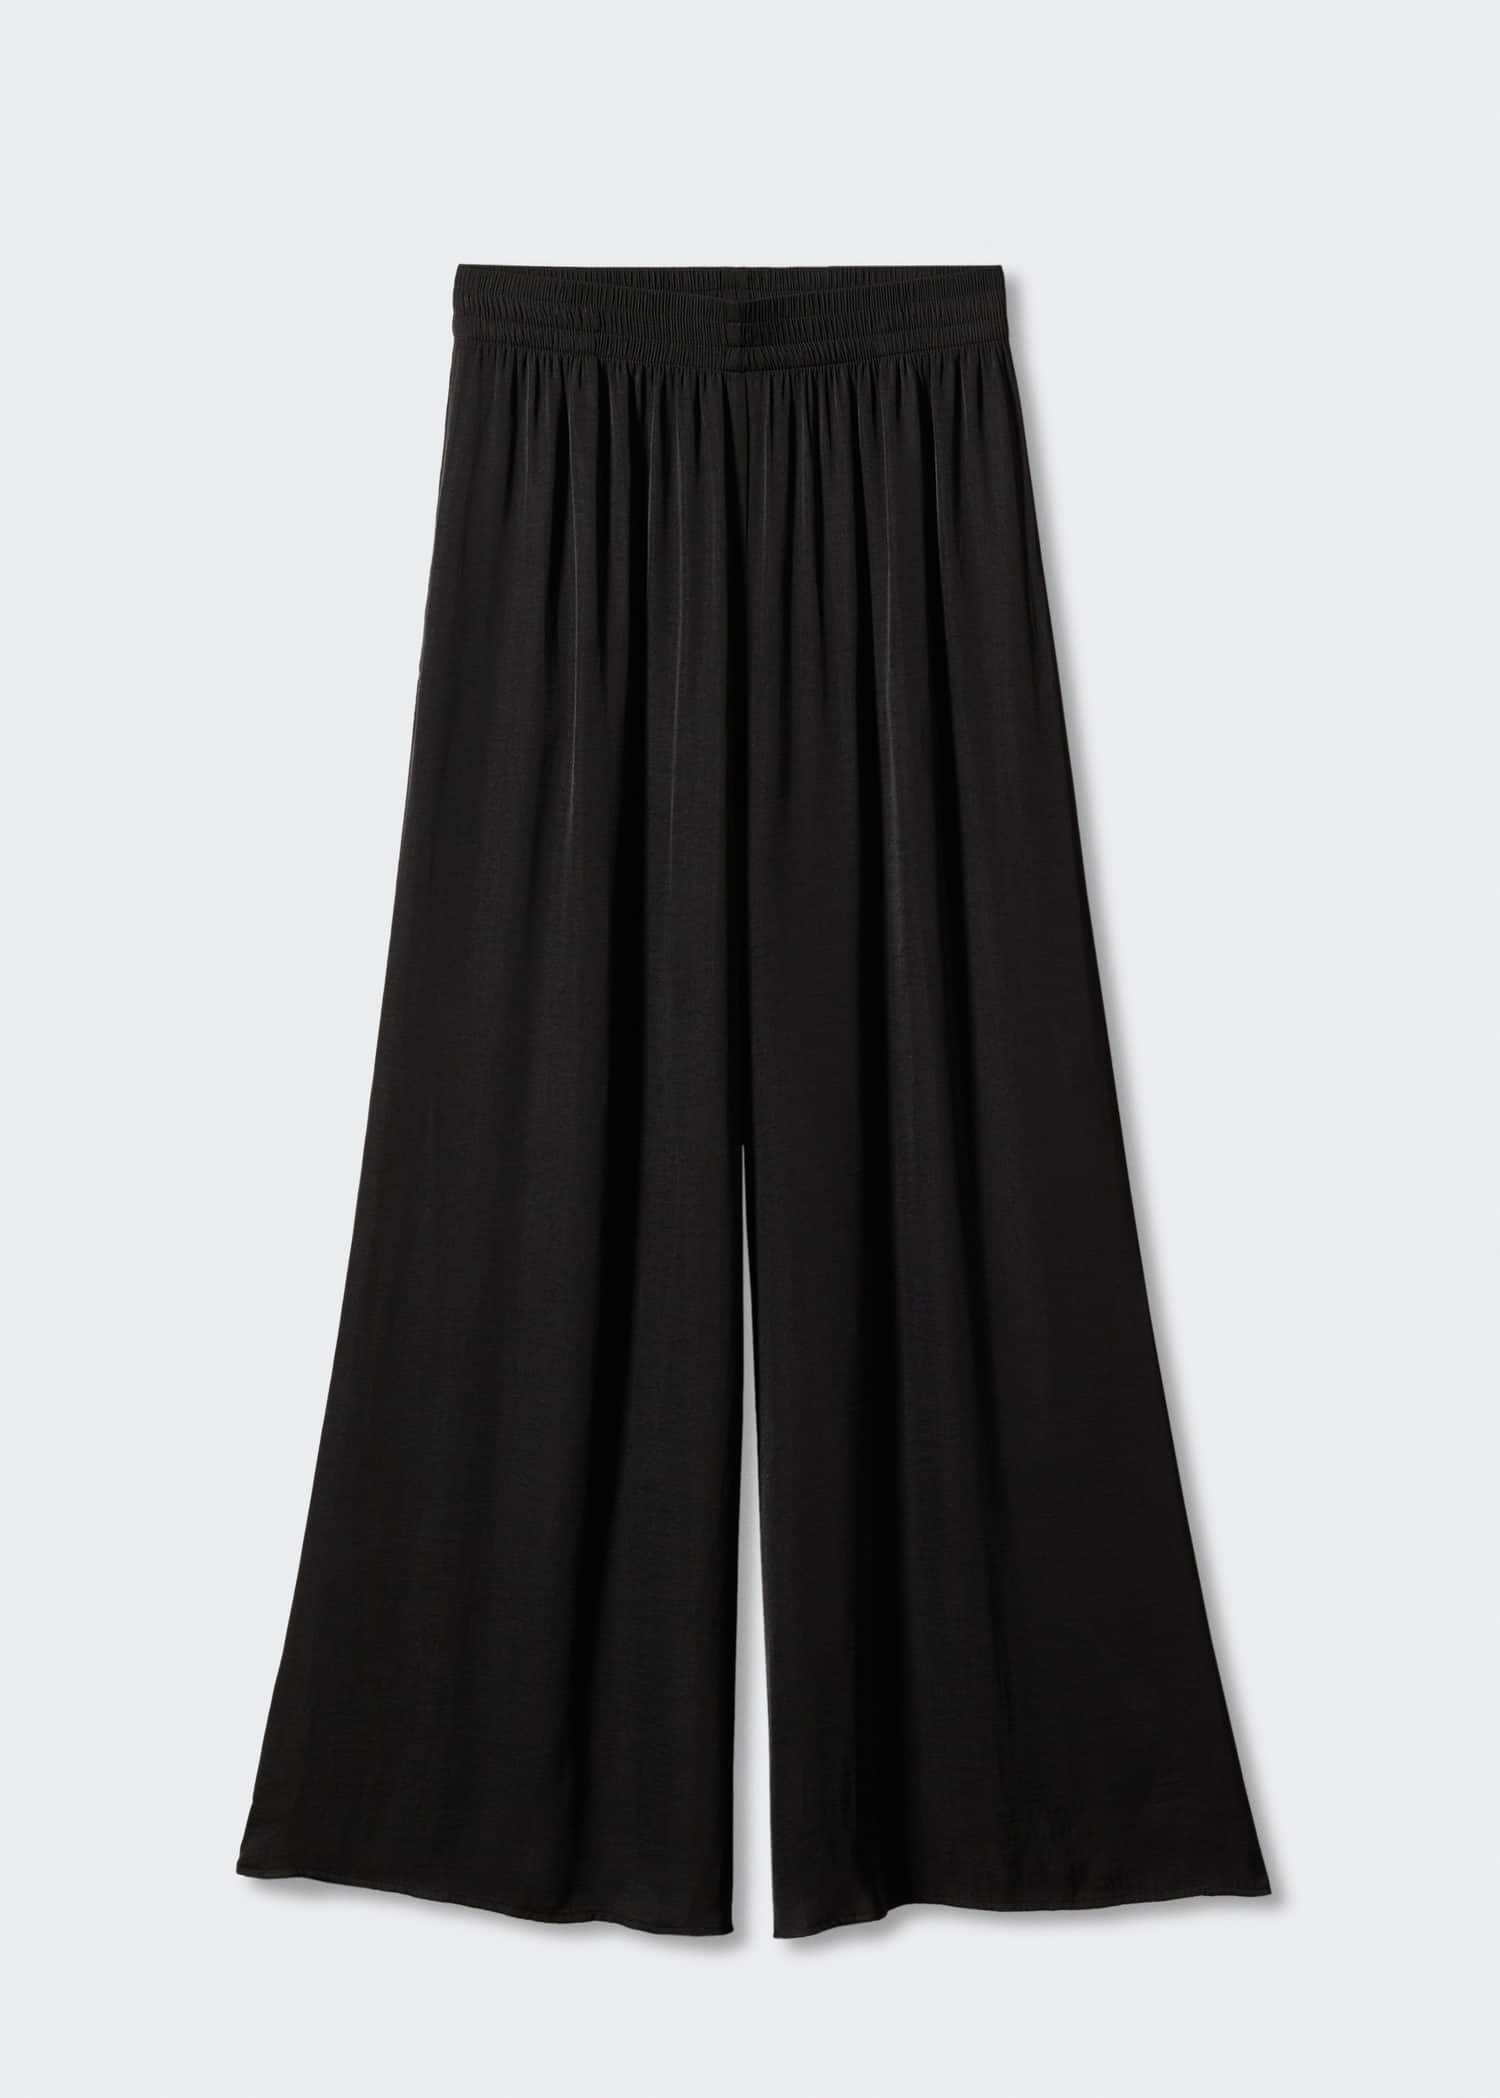 Low-rise palazzo trousers